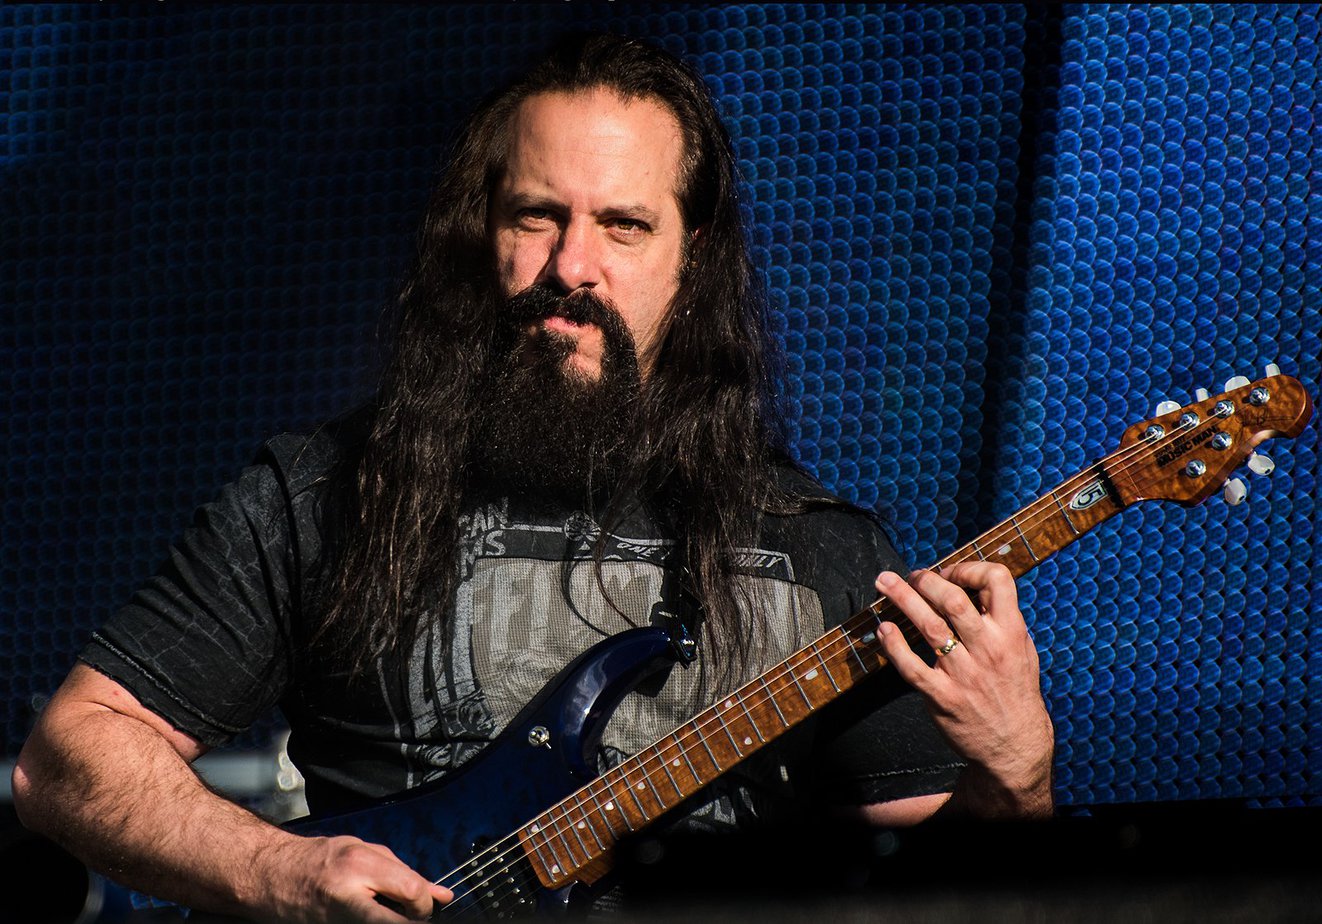 Dream Theater’s John Petrucci Explains How You Should Practice Guitar so You Can ’Really Dissect Your Playing’